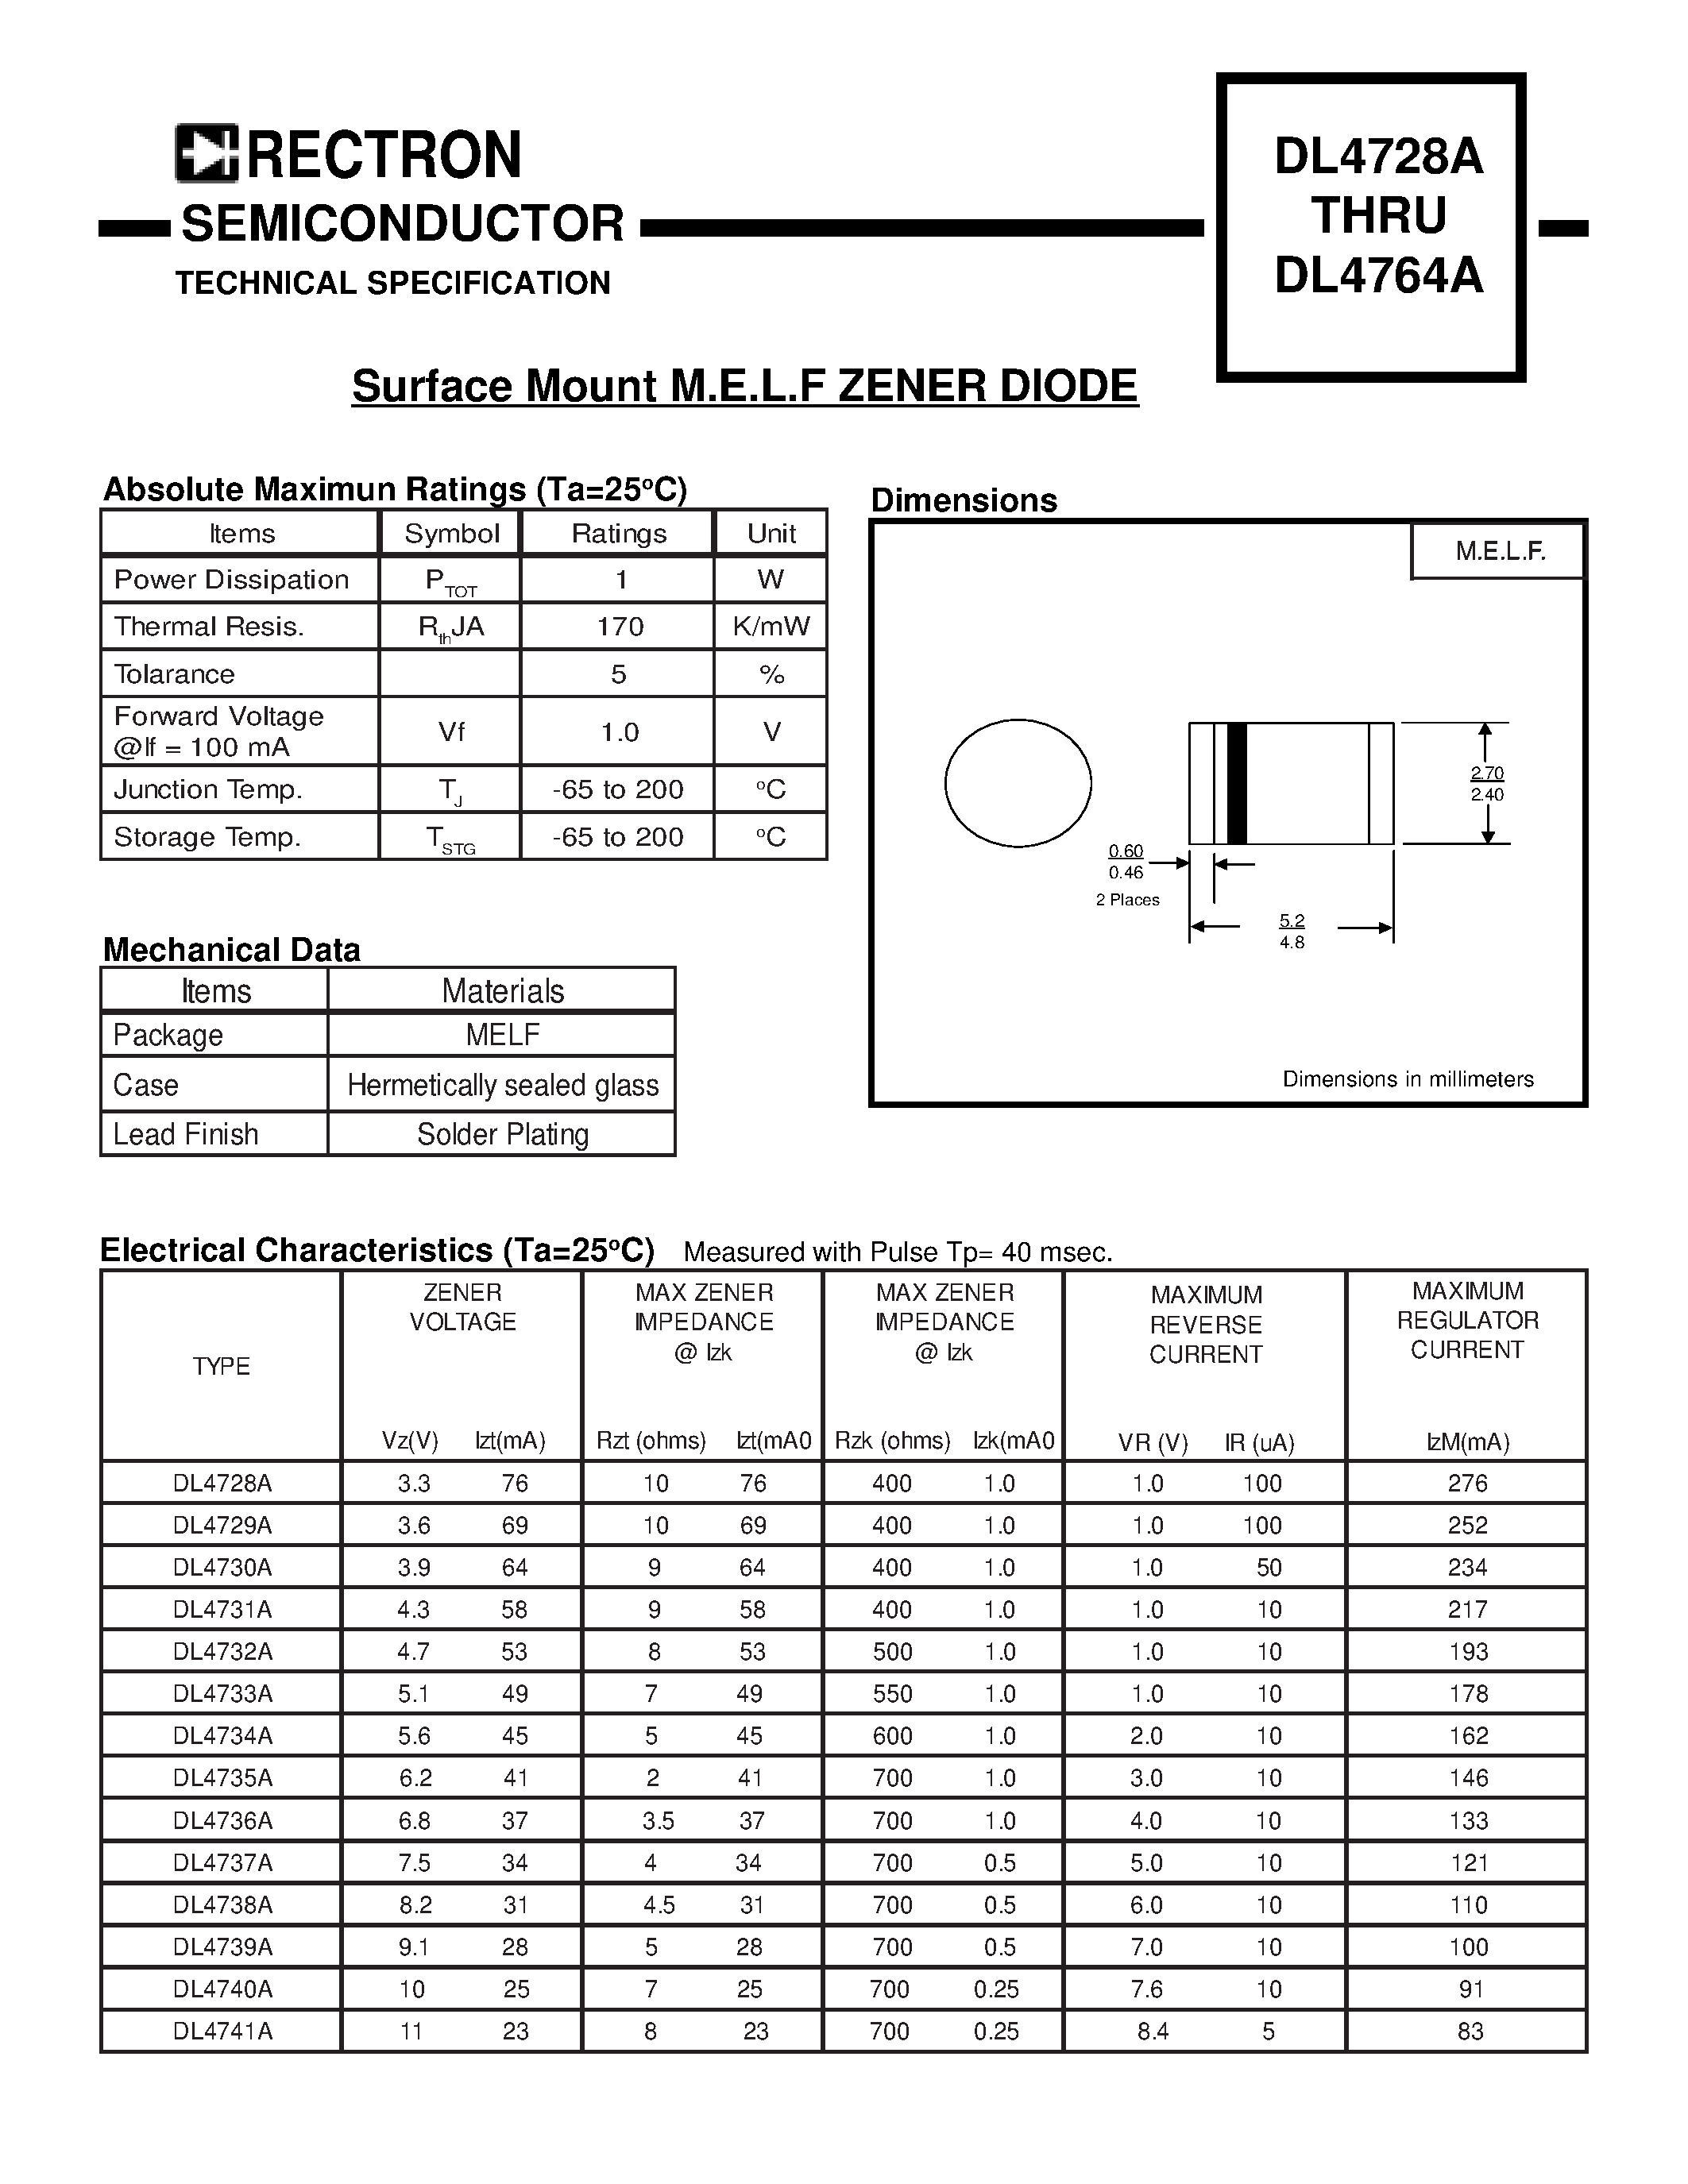 Datasheet DL4746A - Surface Mount M.E.L.F ZENER DIODE page 1